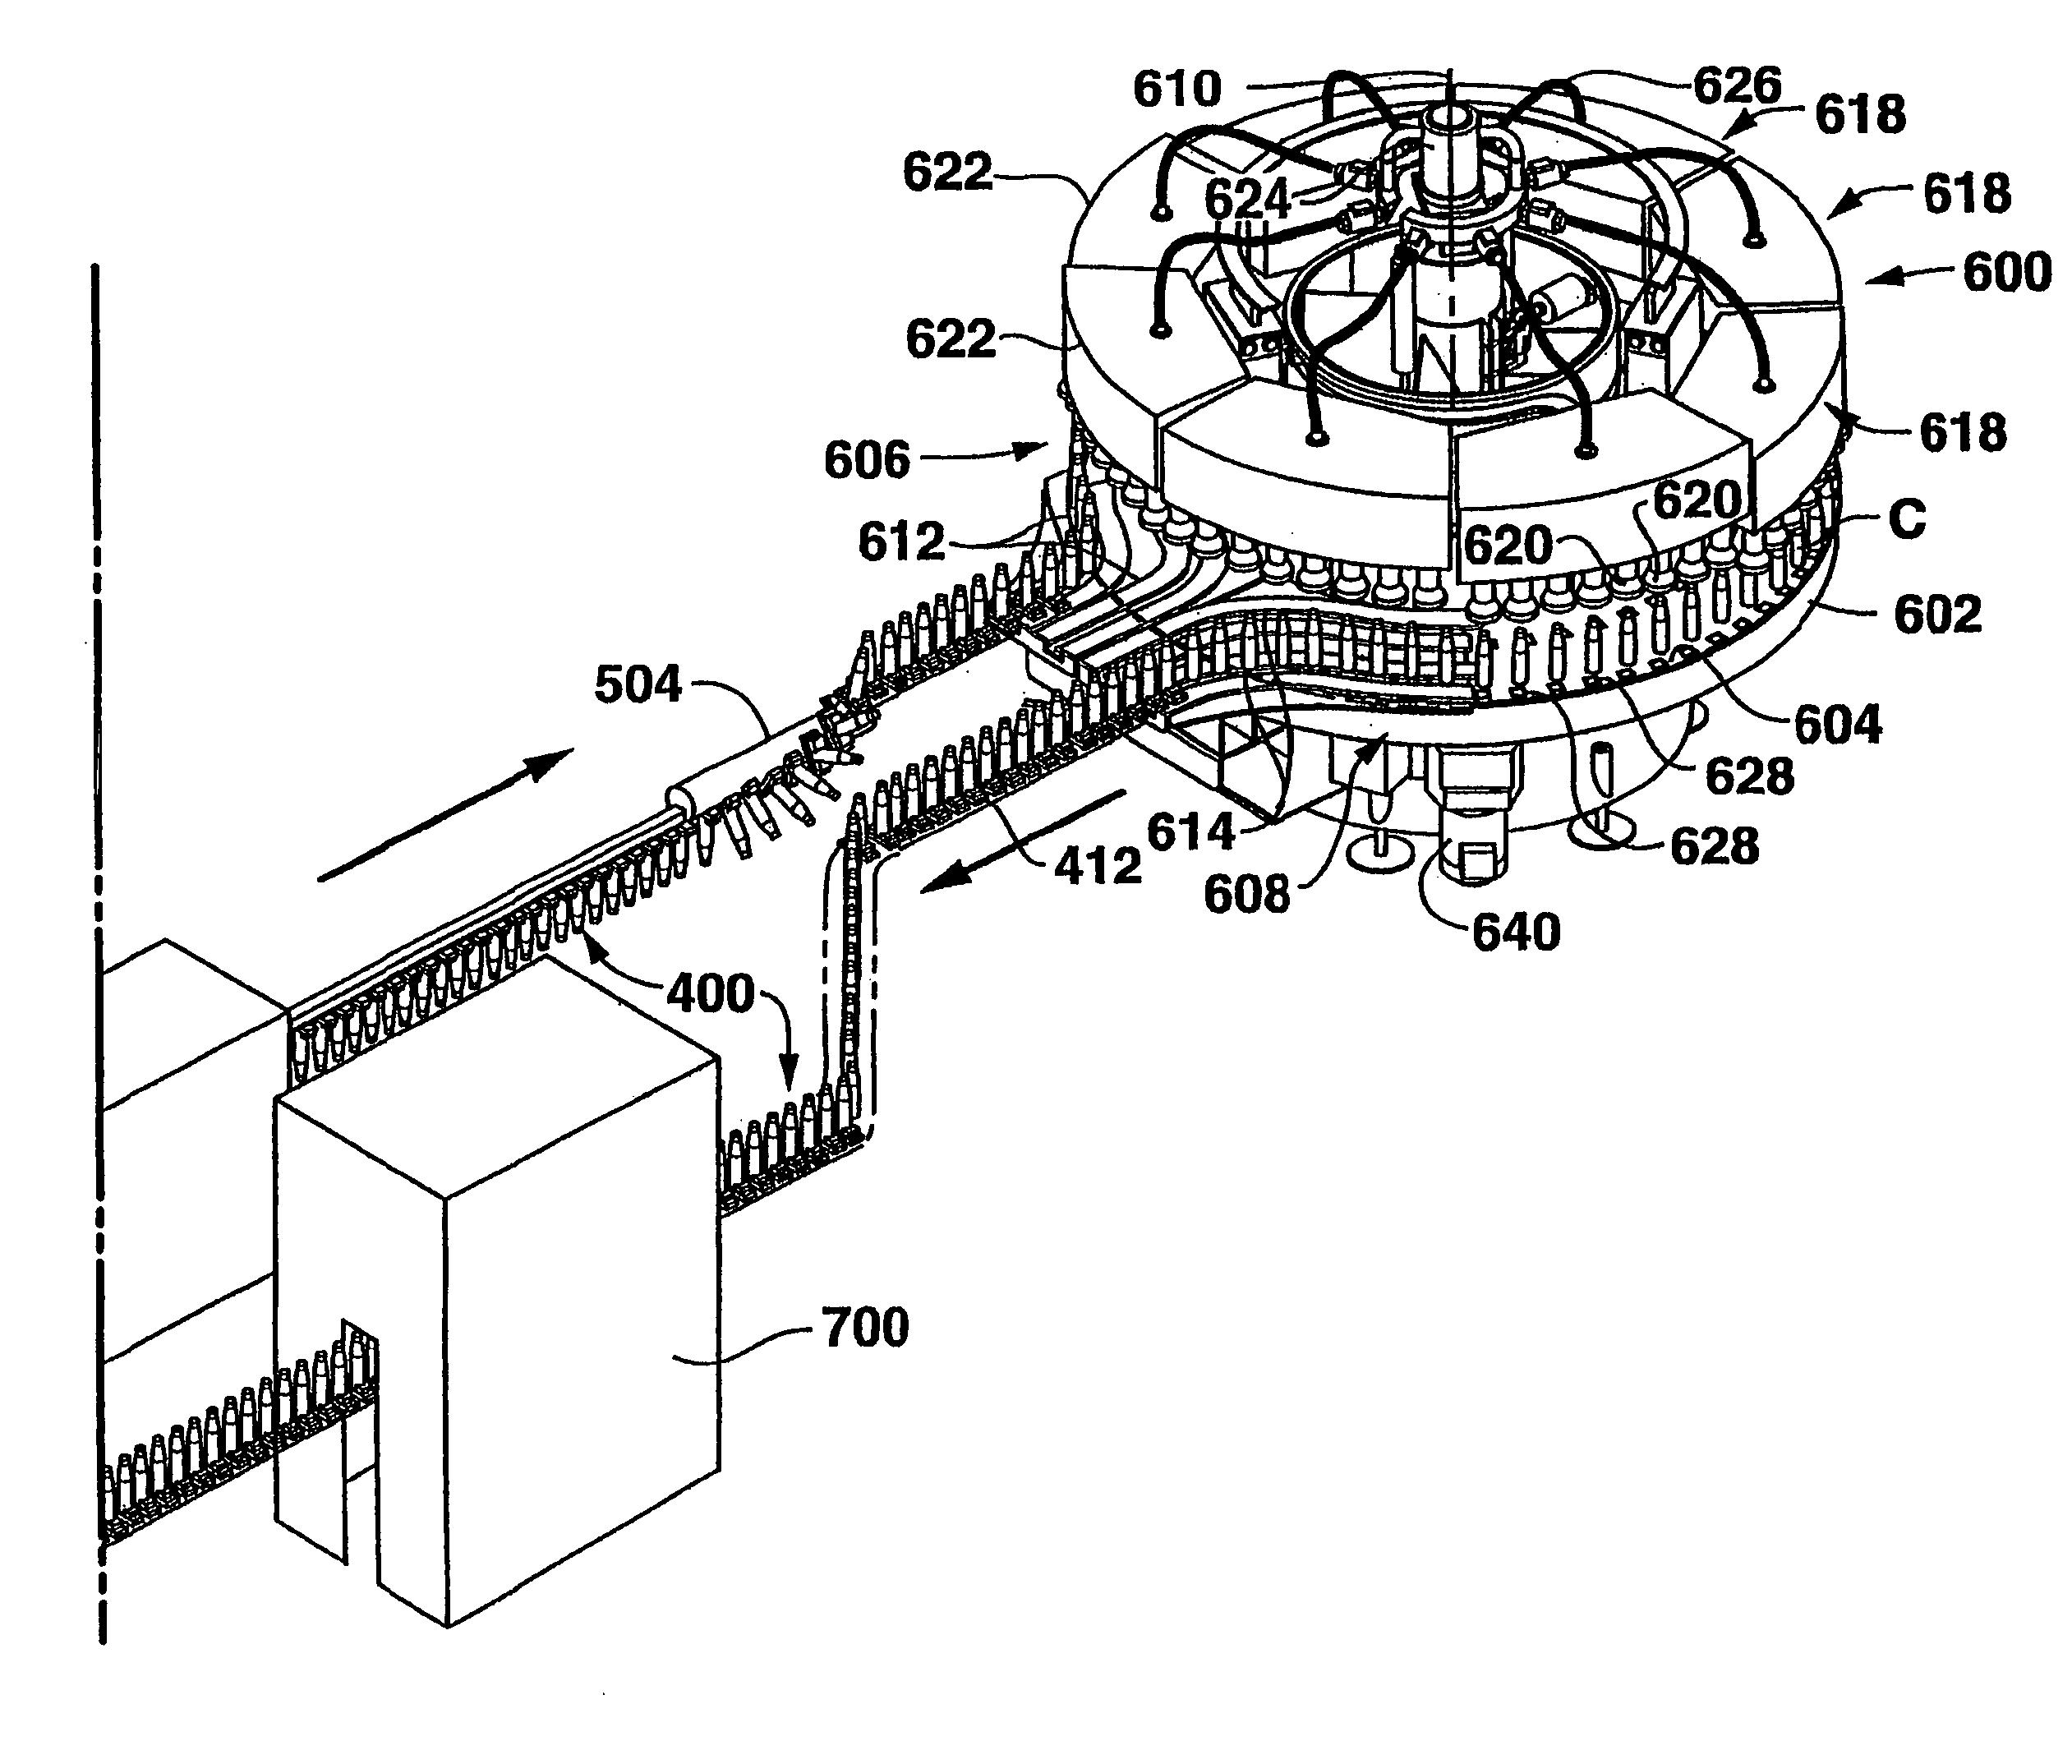 Rotary filling machine and related components, and related method